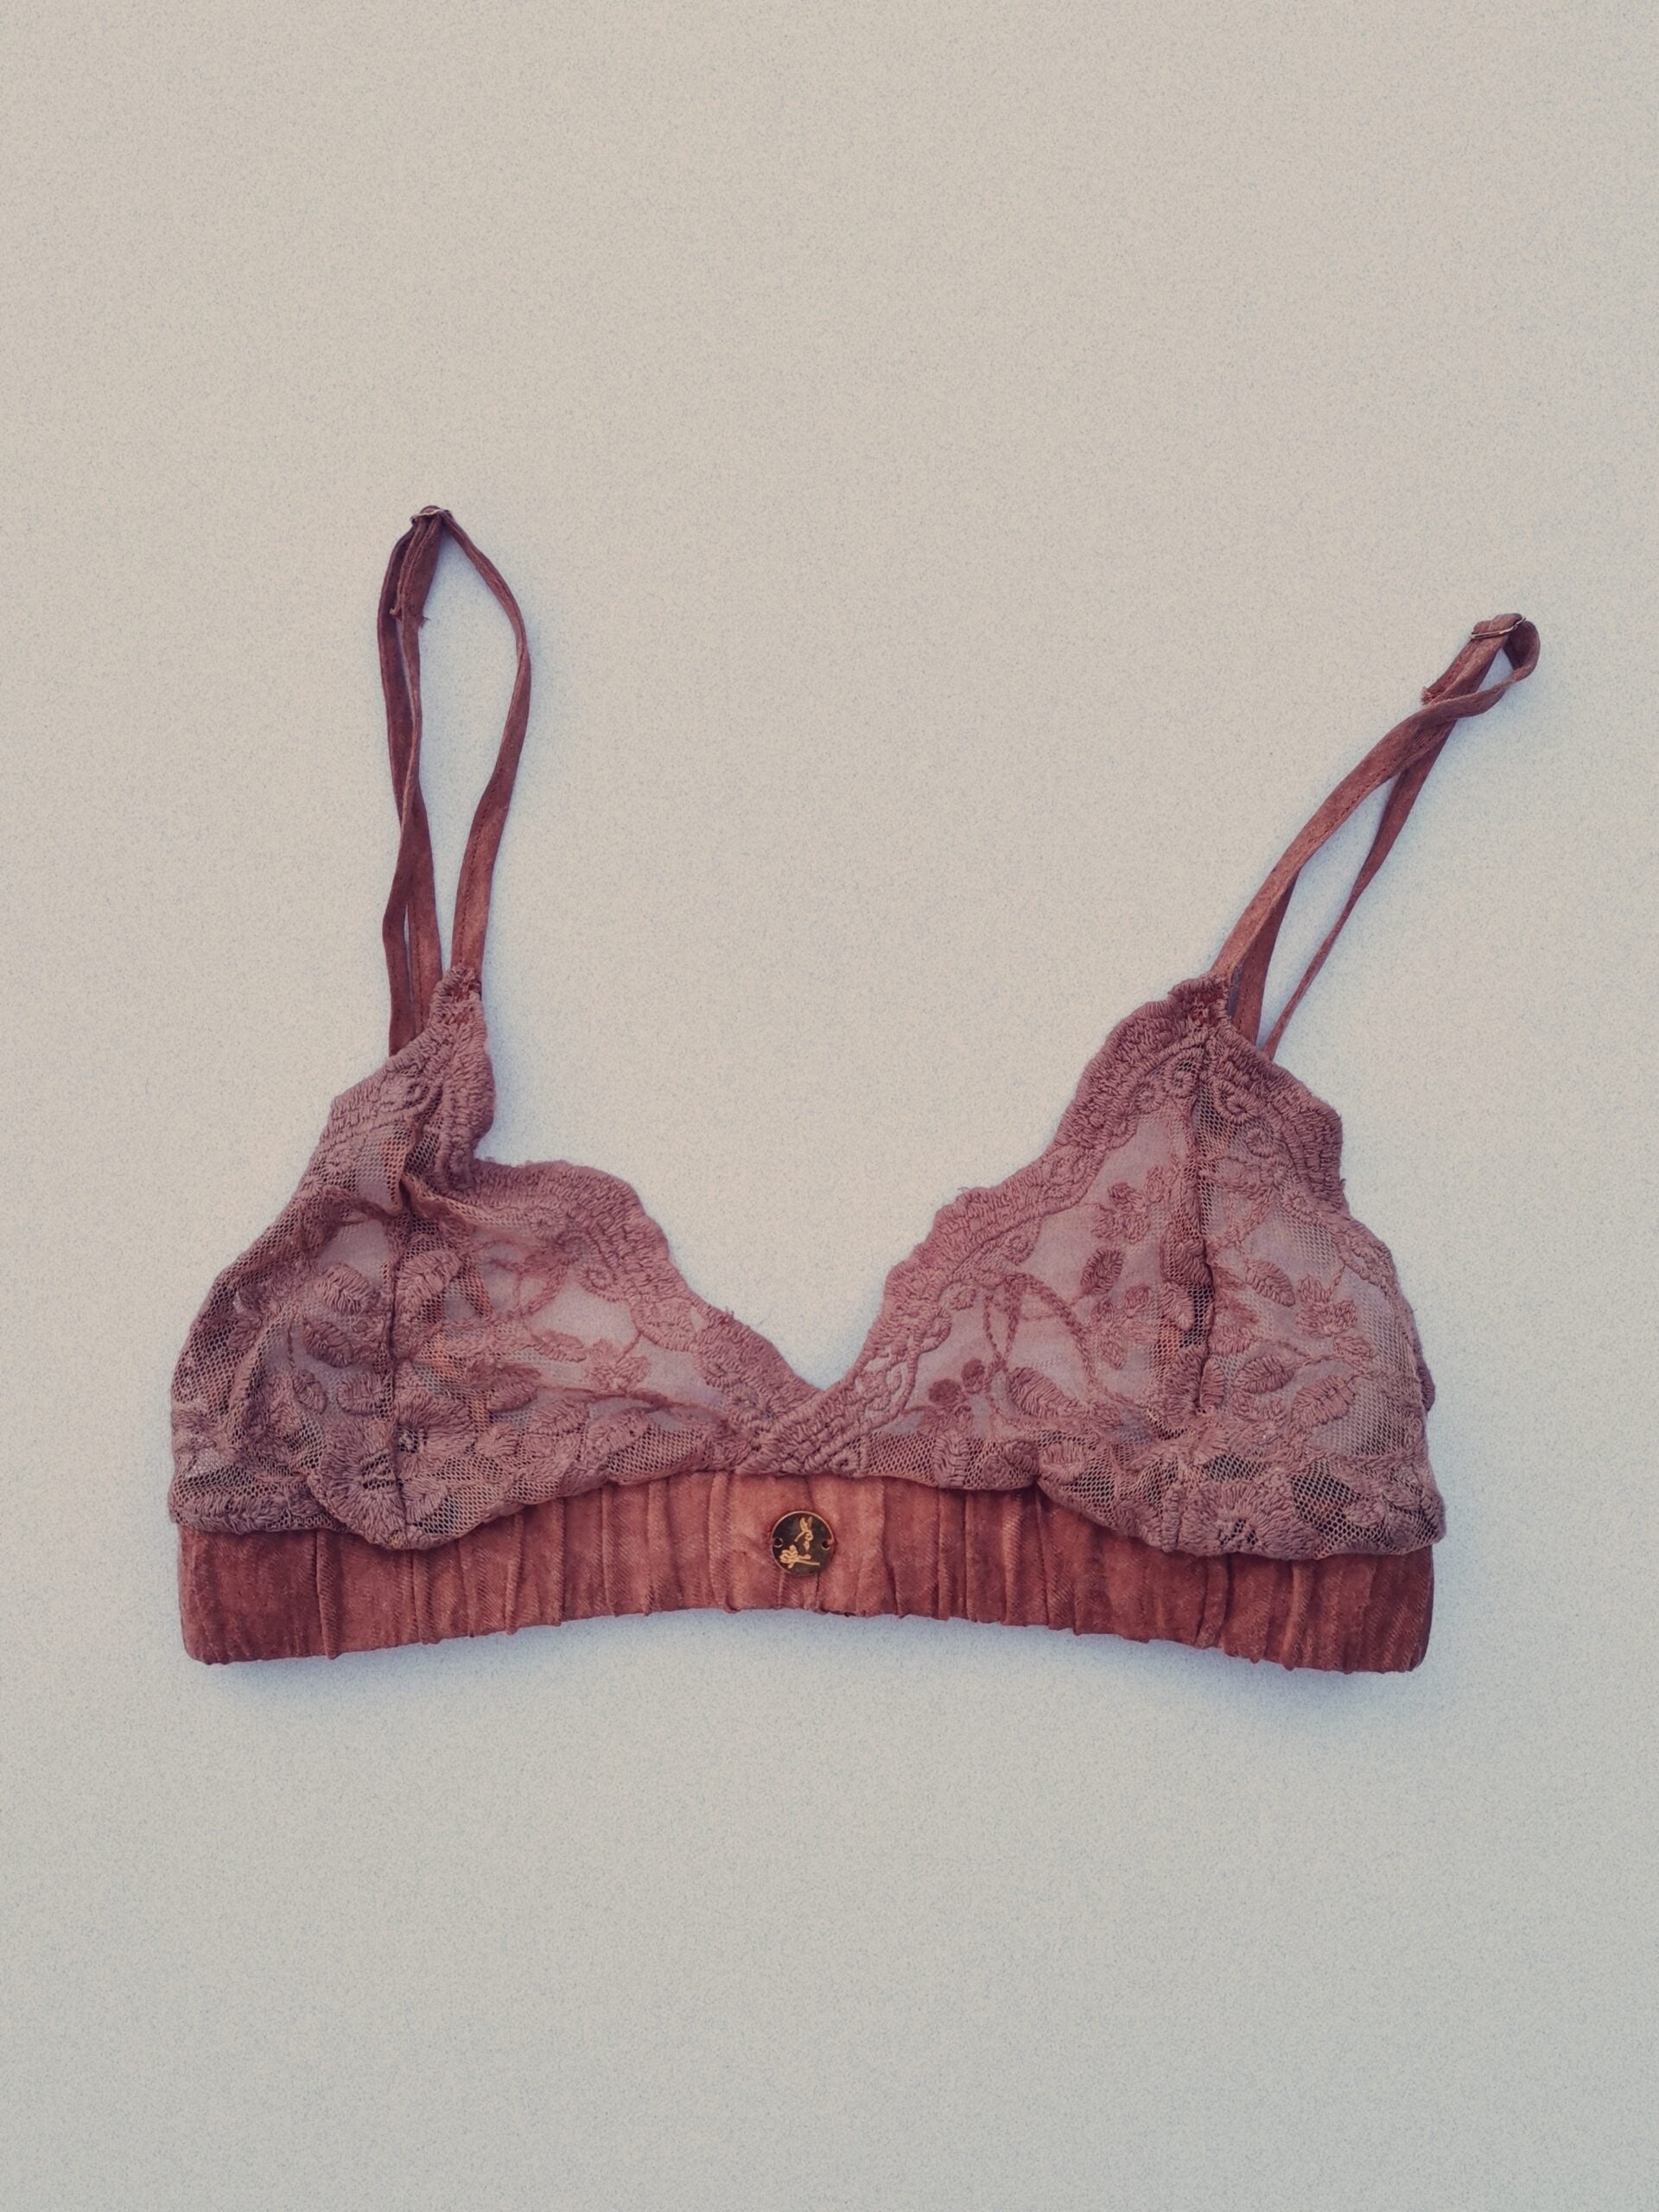 Pink bralet made of linen and lace designed for women.